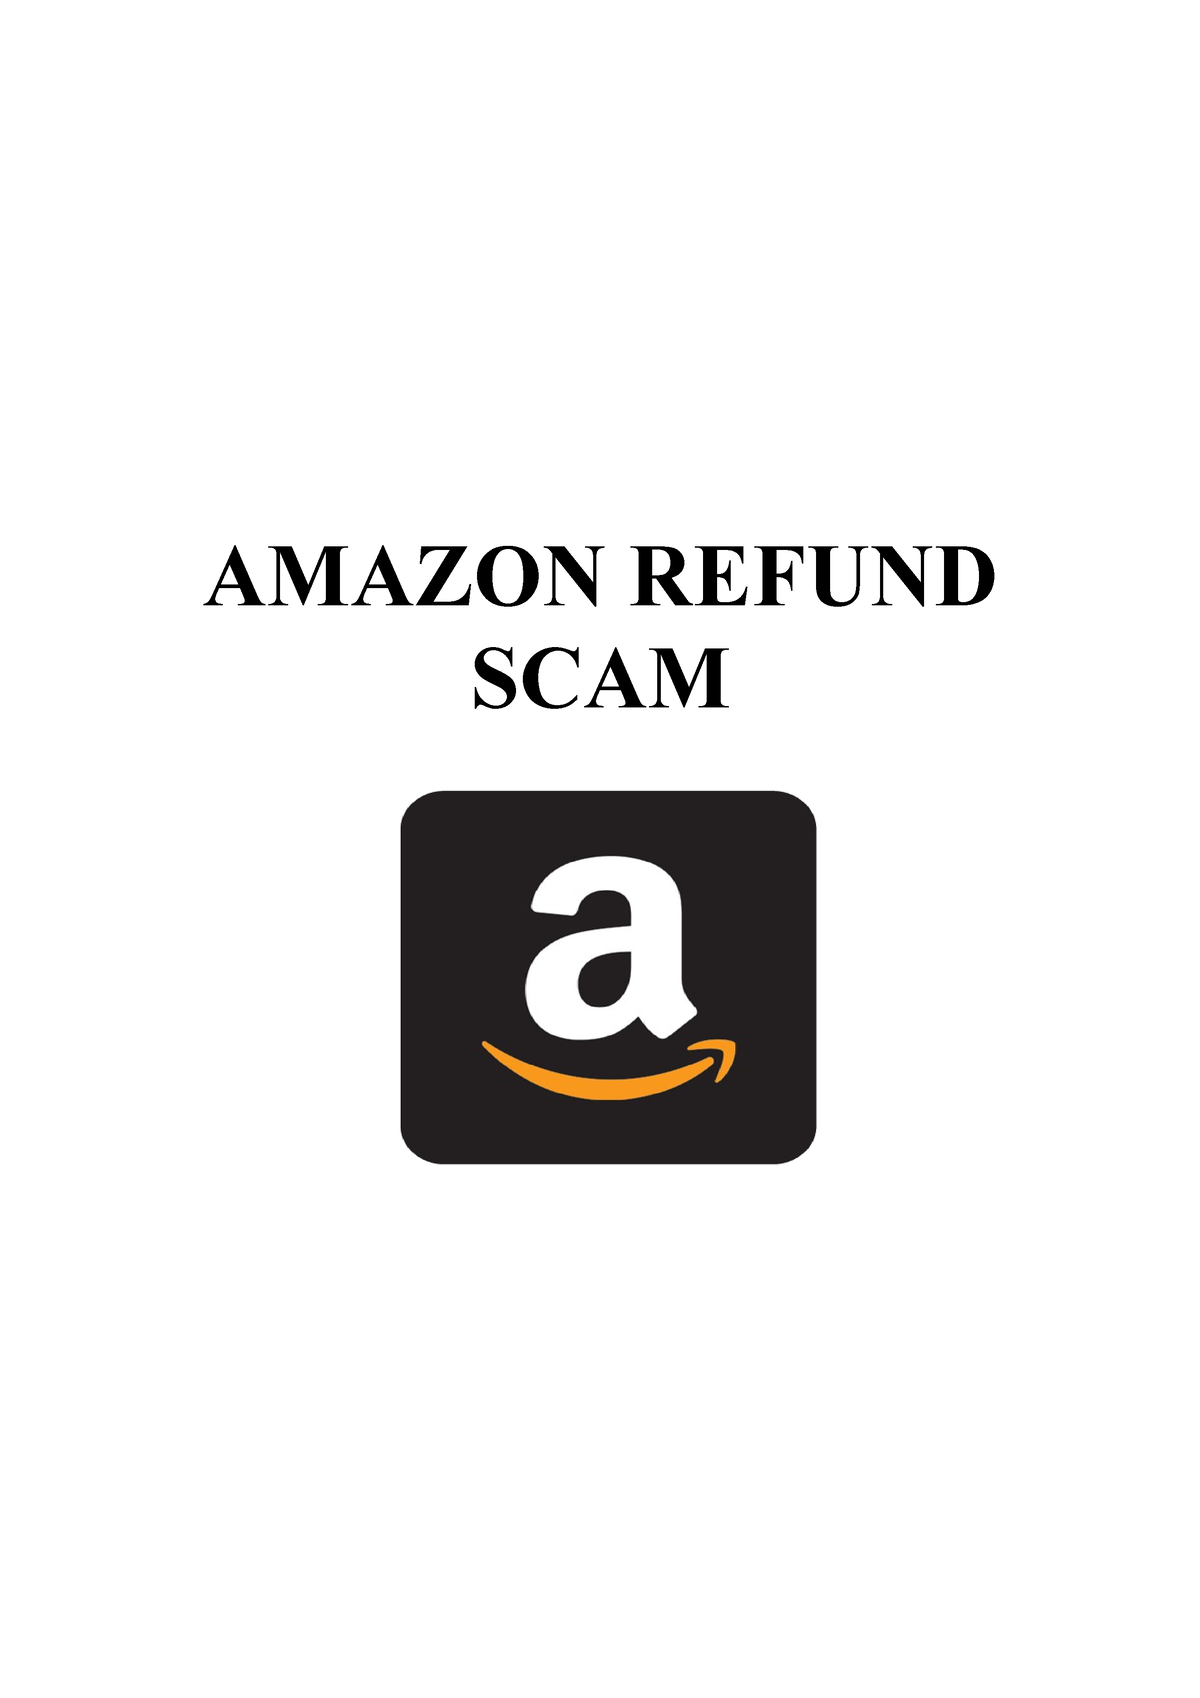 amazon-refund-scam-amazon-refund-scam-choose-something-you-want-to